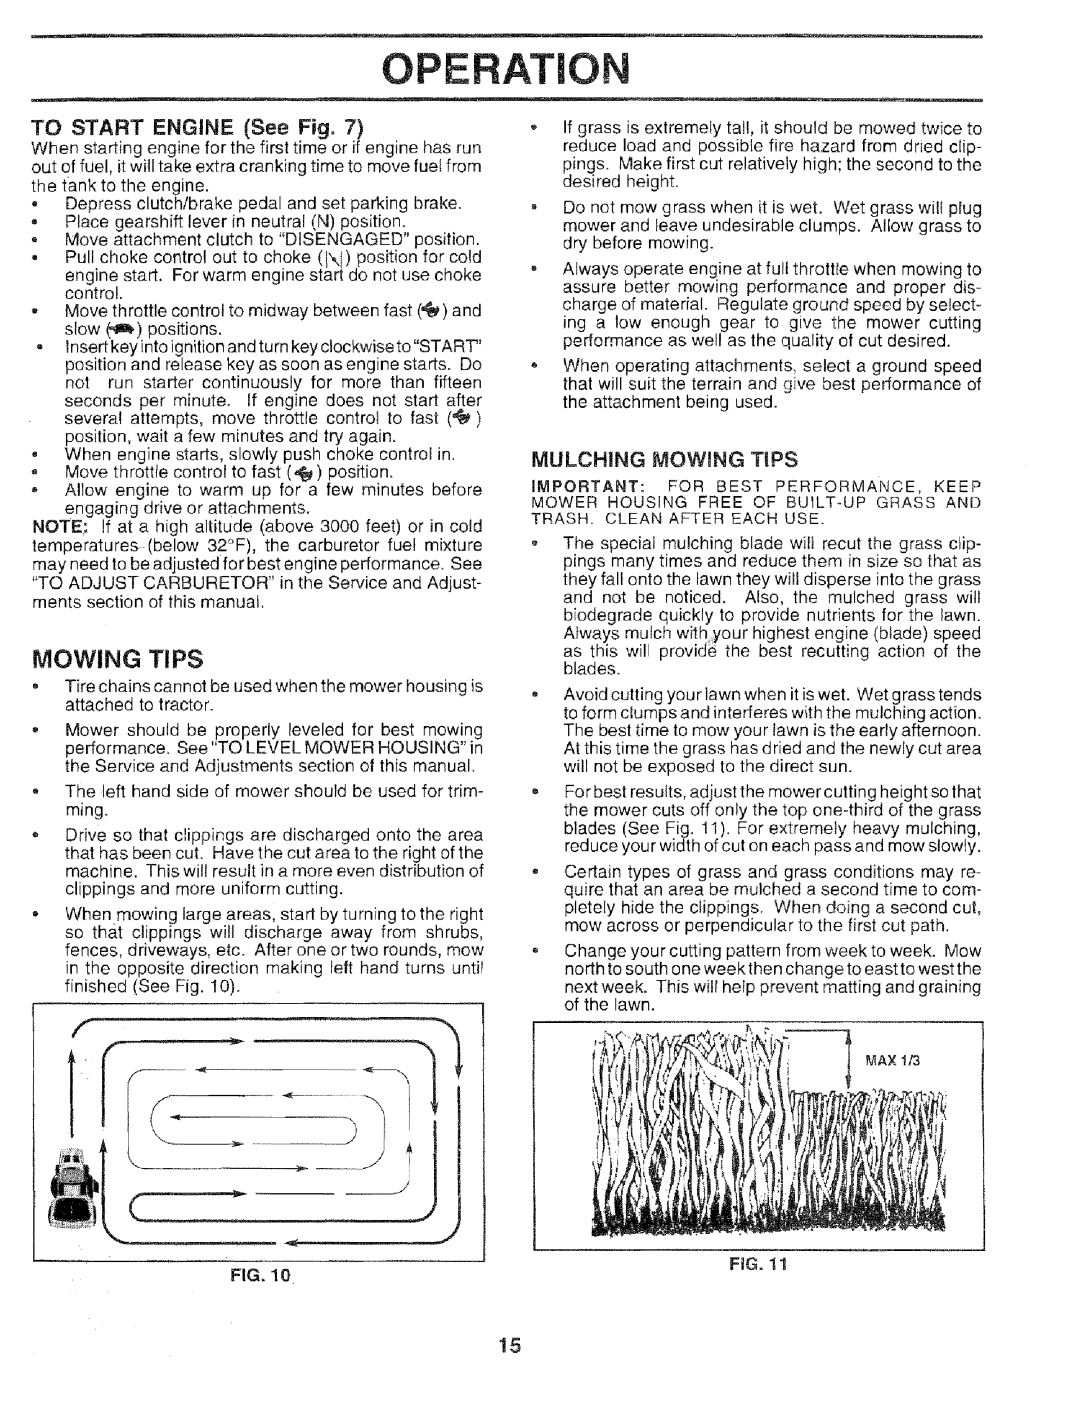 Sears 917.25051 manual Operation, TO START ENGINE See Fig, Mulching Mowing Tips 